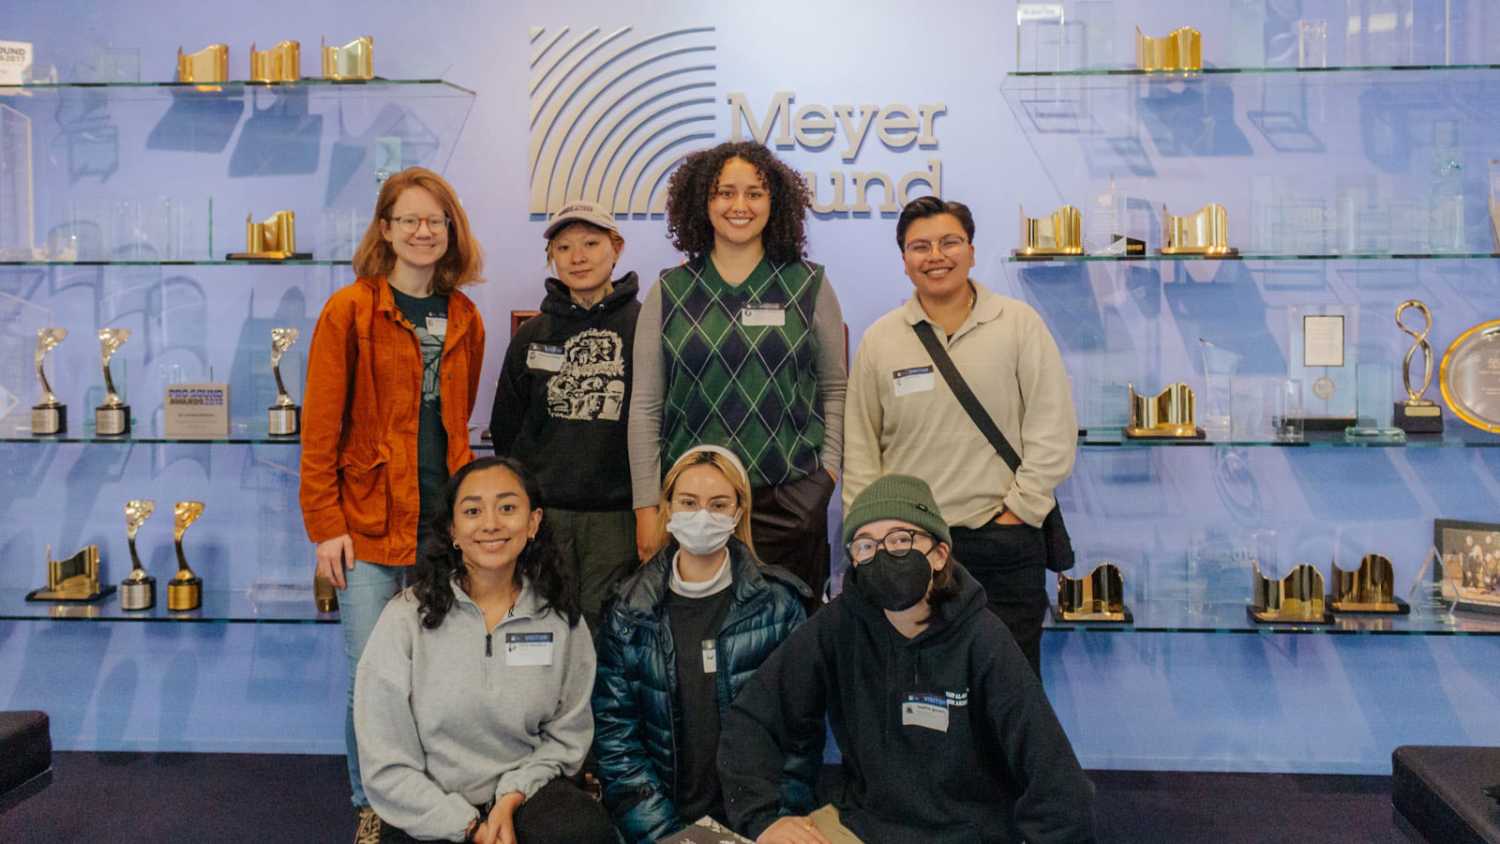 Interns from Women’s Audio Mission toured the factory